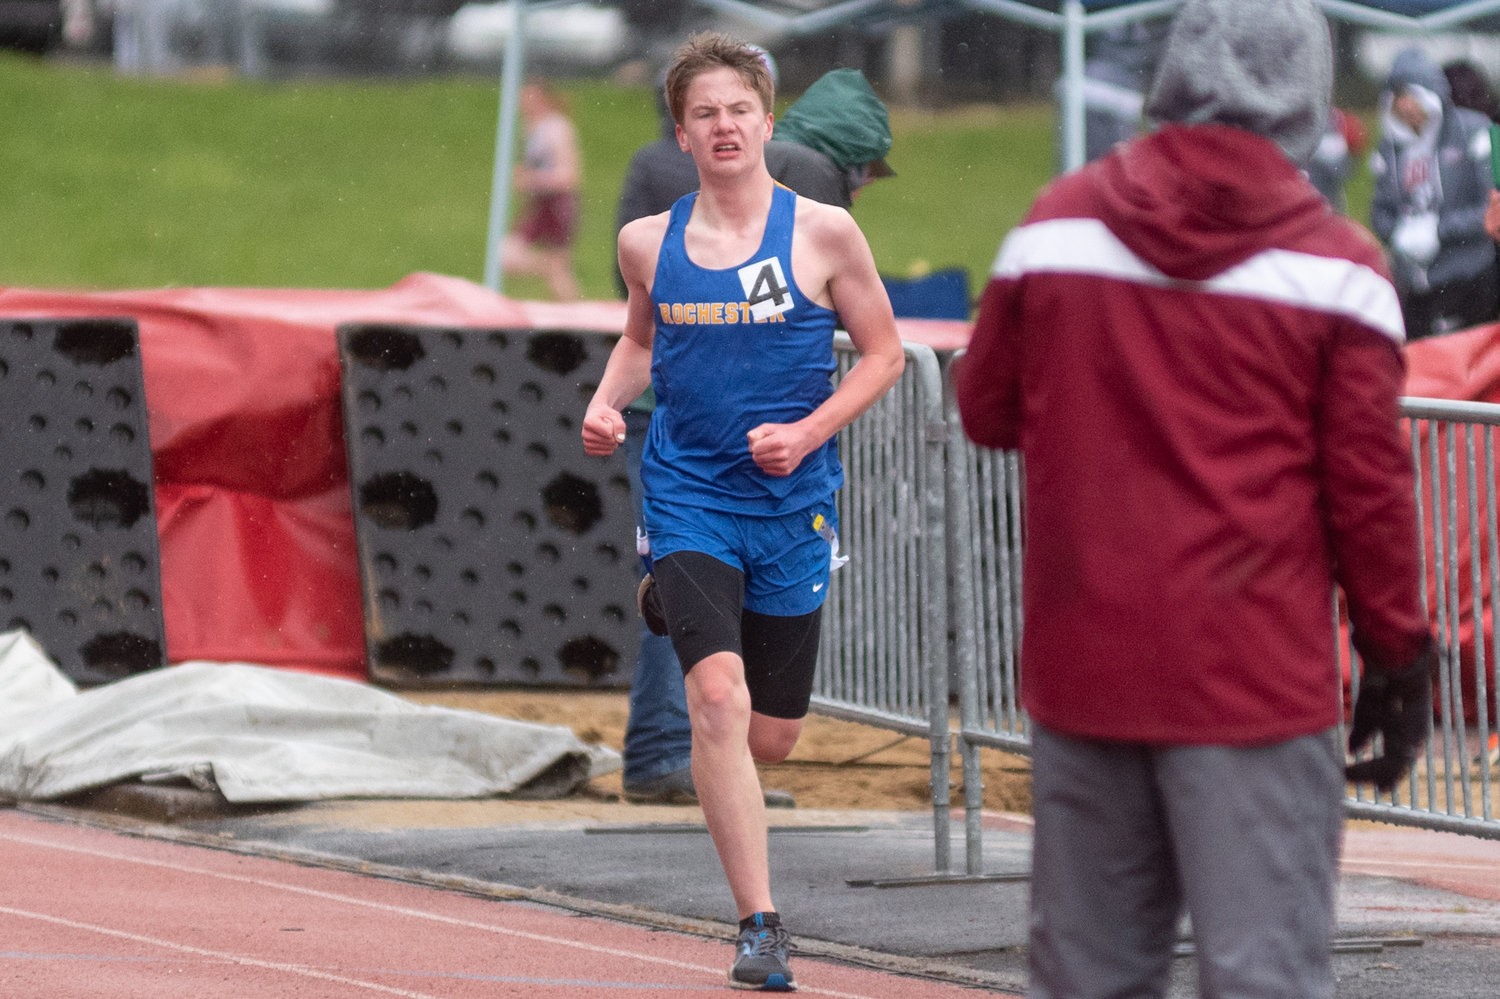 Rochester distance runner Gunnar Morgan sprints toward the finish line at W.F. West in the 1600m April 13.